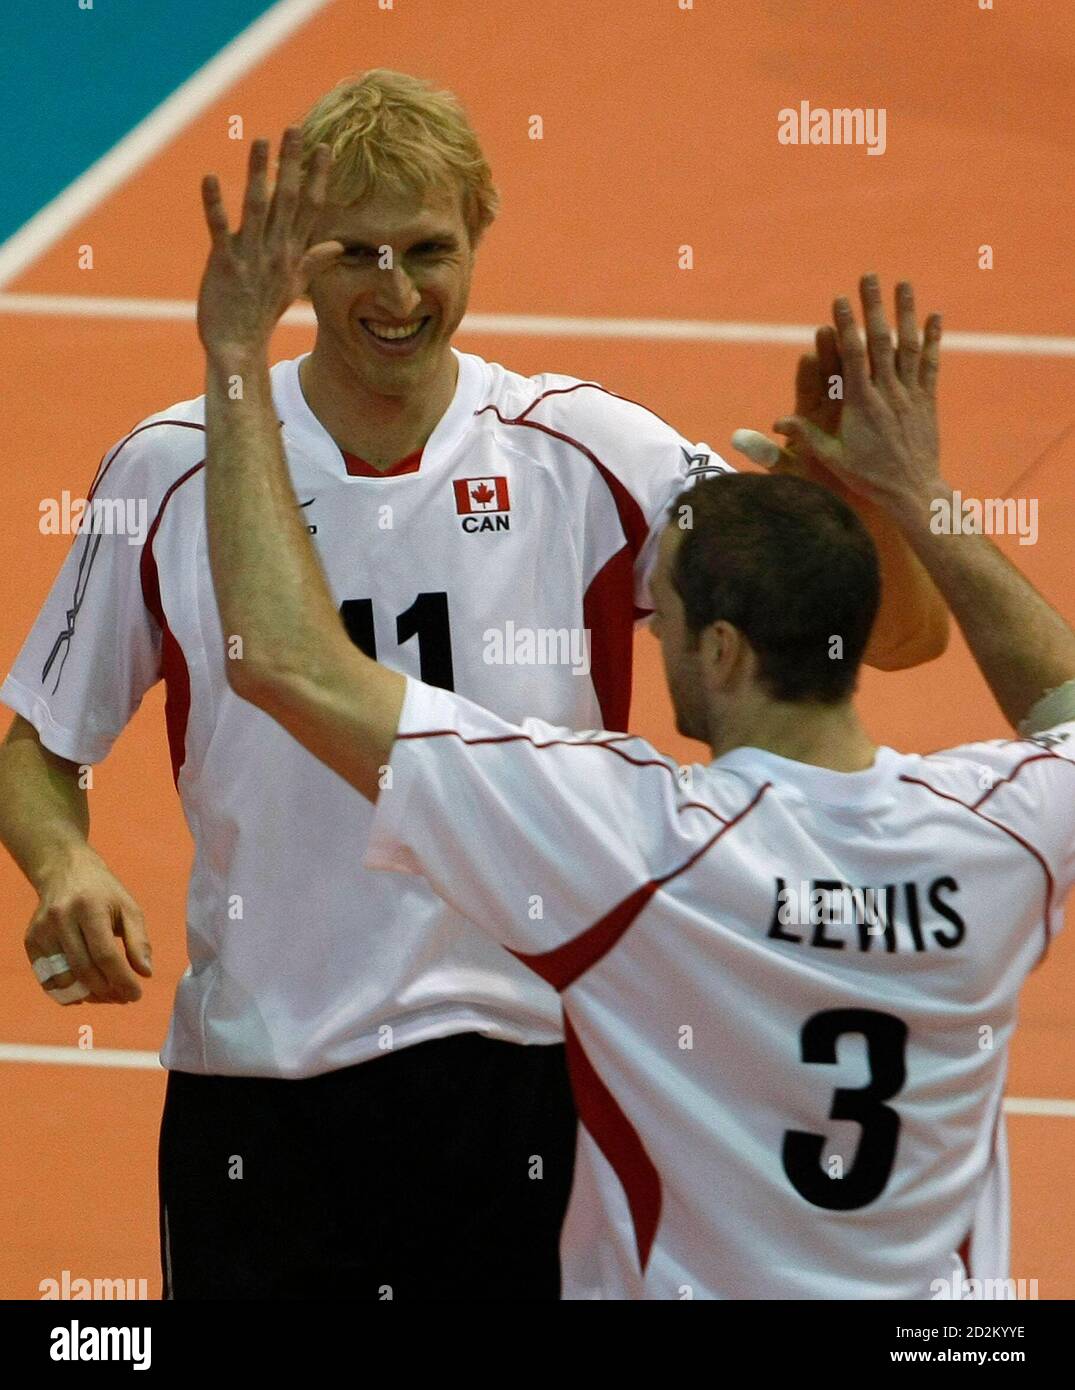 Canada's Steve Brinkman and Daniel Lewis (3) celebrate scoring against Cuba during the 2008 NORCECA Men's Continental Olympic Qualification Championship volleyball match in Caguas January 7, 2008.  REUTERS/Ana Martinez (PUERTO RICO) Stock Photo